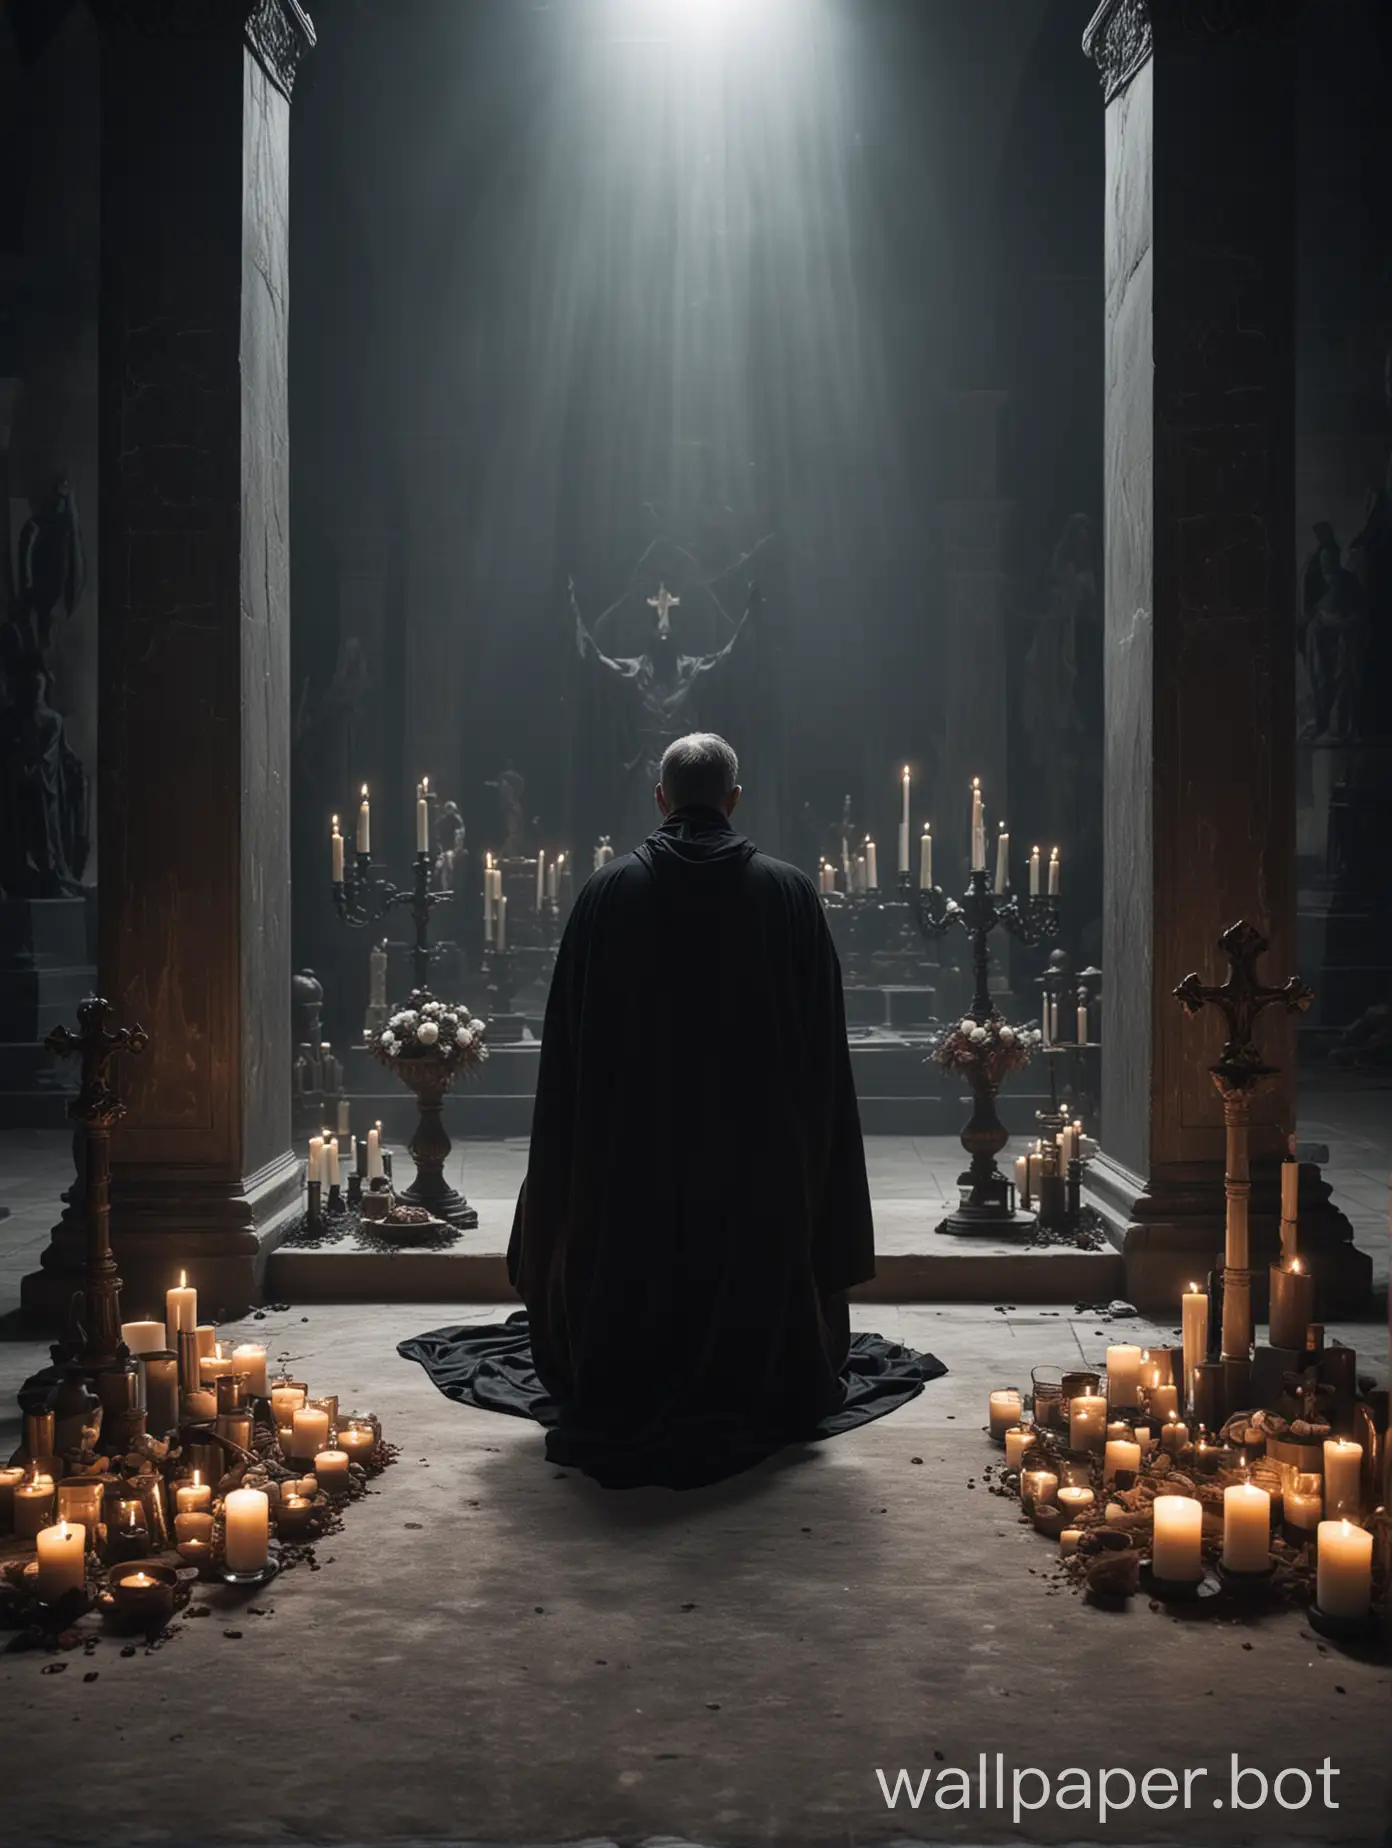 Solitary-Figure-in-Black-Robe-Praying-at-Illuminated-Altar-Surrounded-by-Ethereal-Spirits